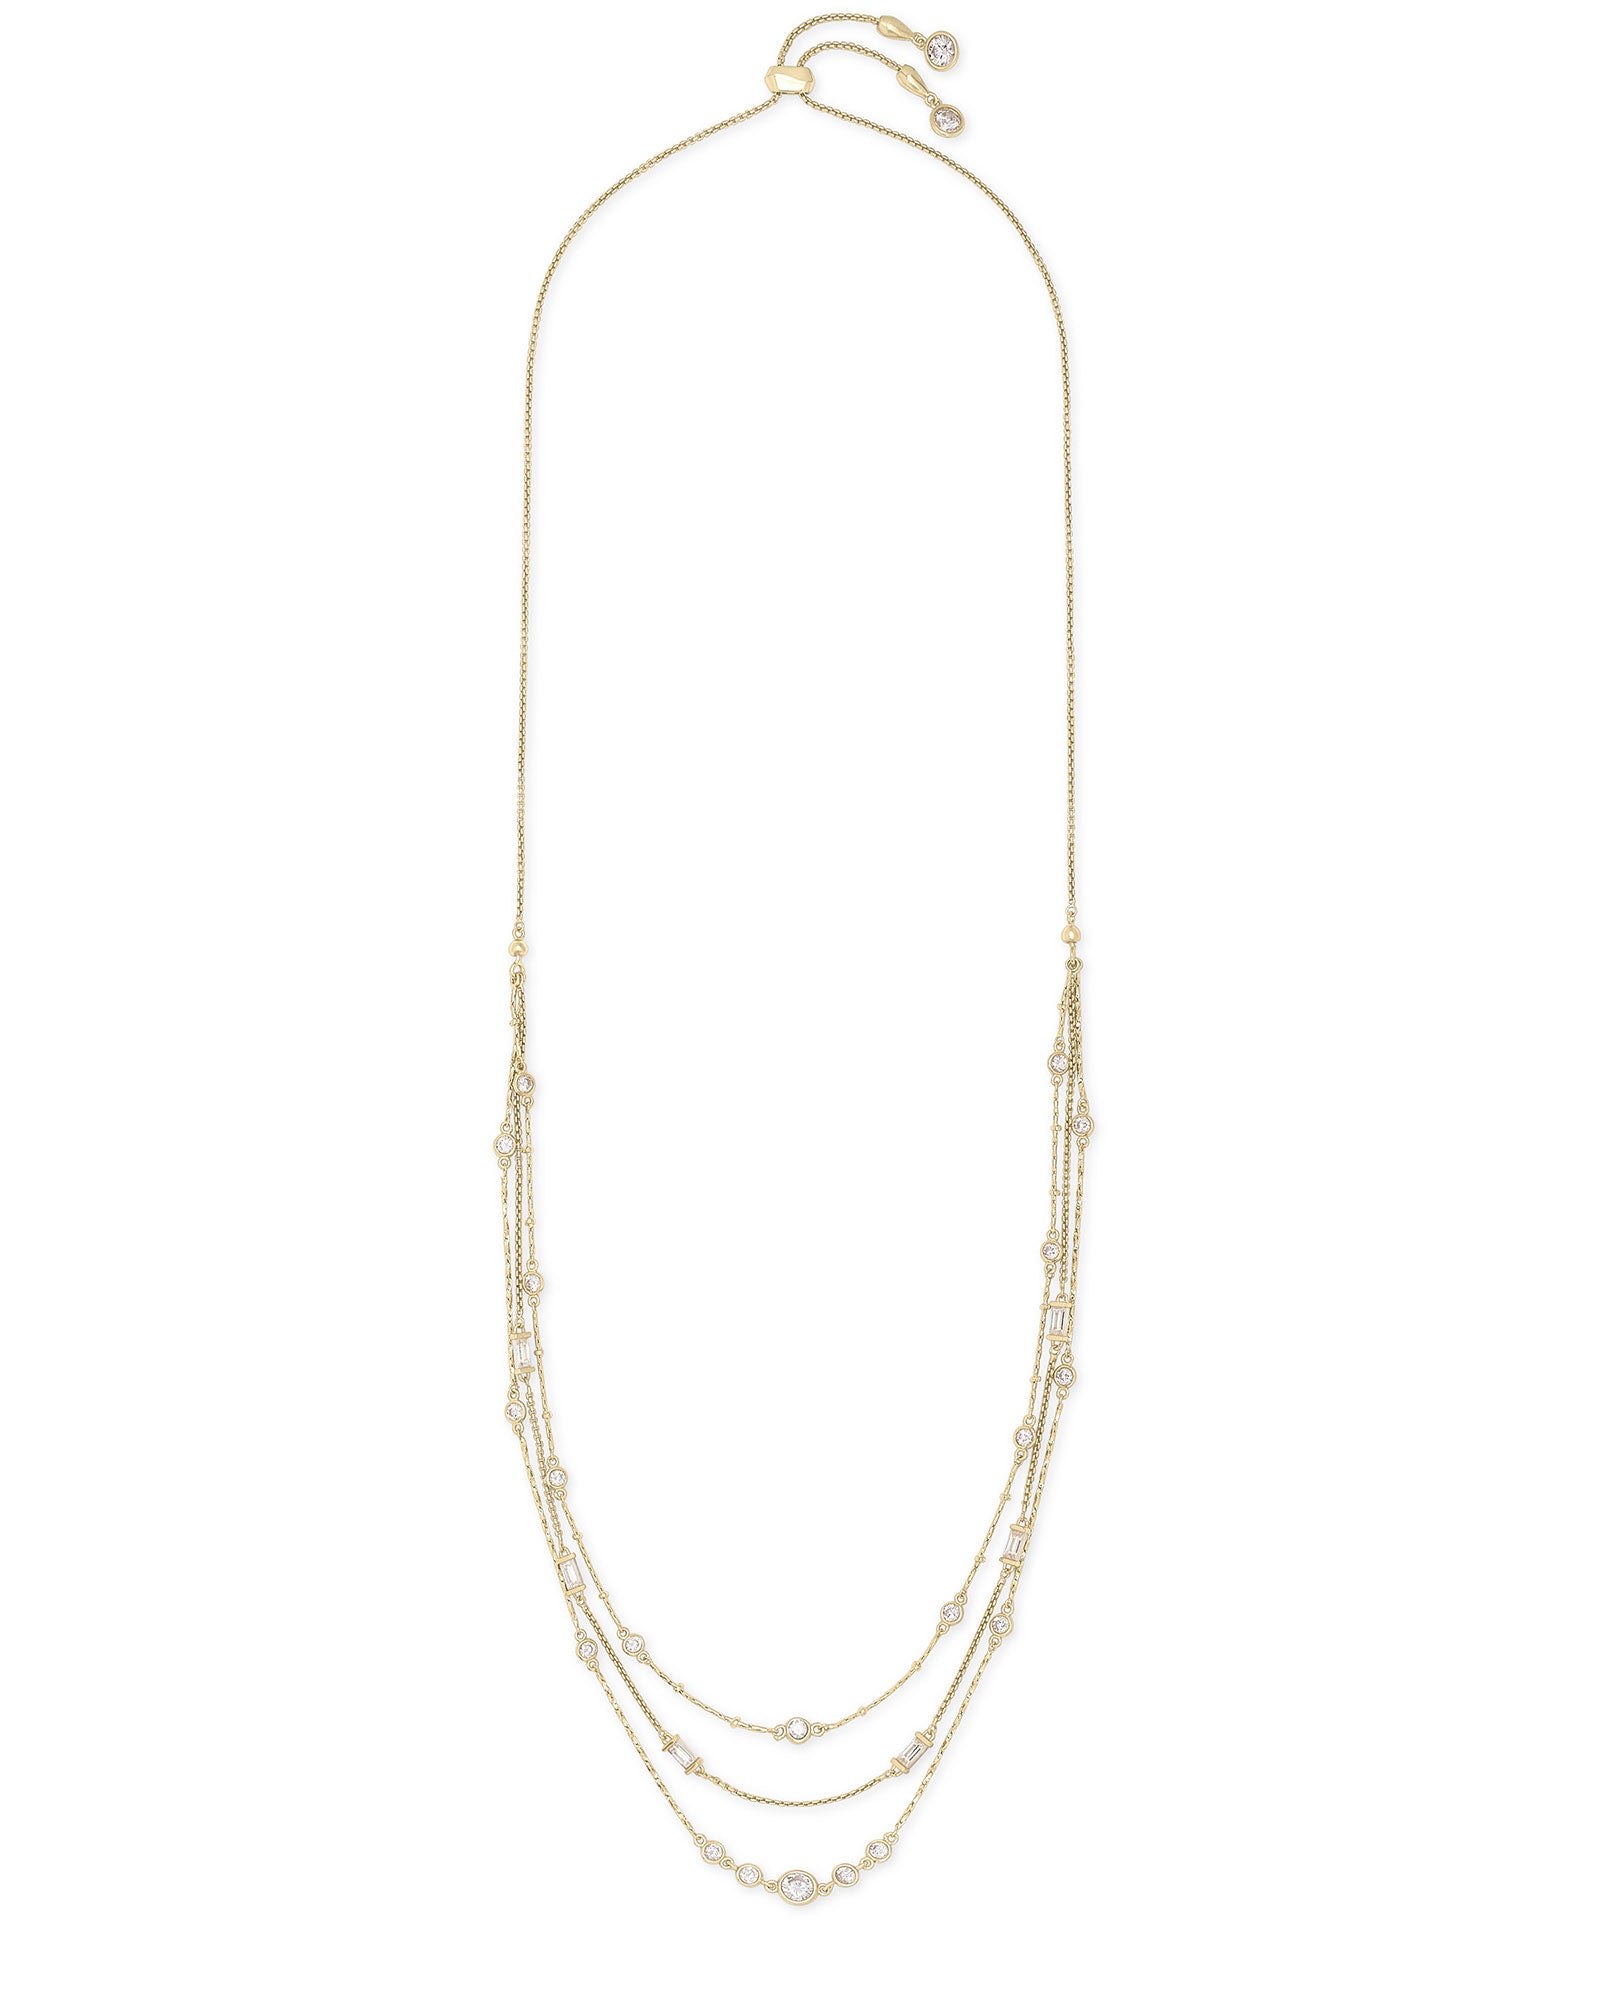 Kendra Scott Rina Multi Strand Necklace Gold Lustre Glass CZ-Necklaces-Kendra Scott-N1289GLD-The Twisted Chandelier